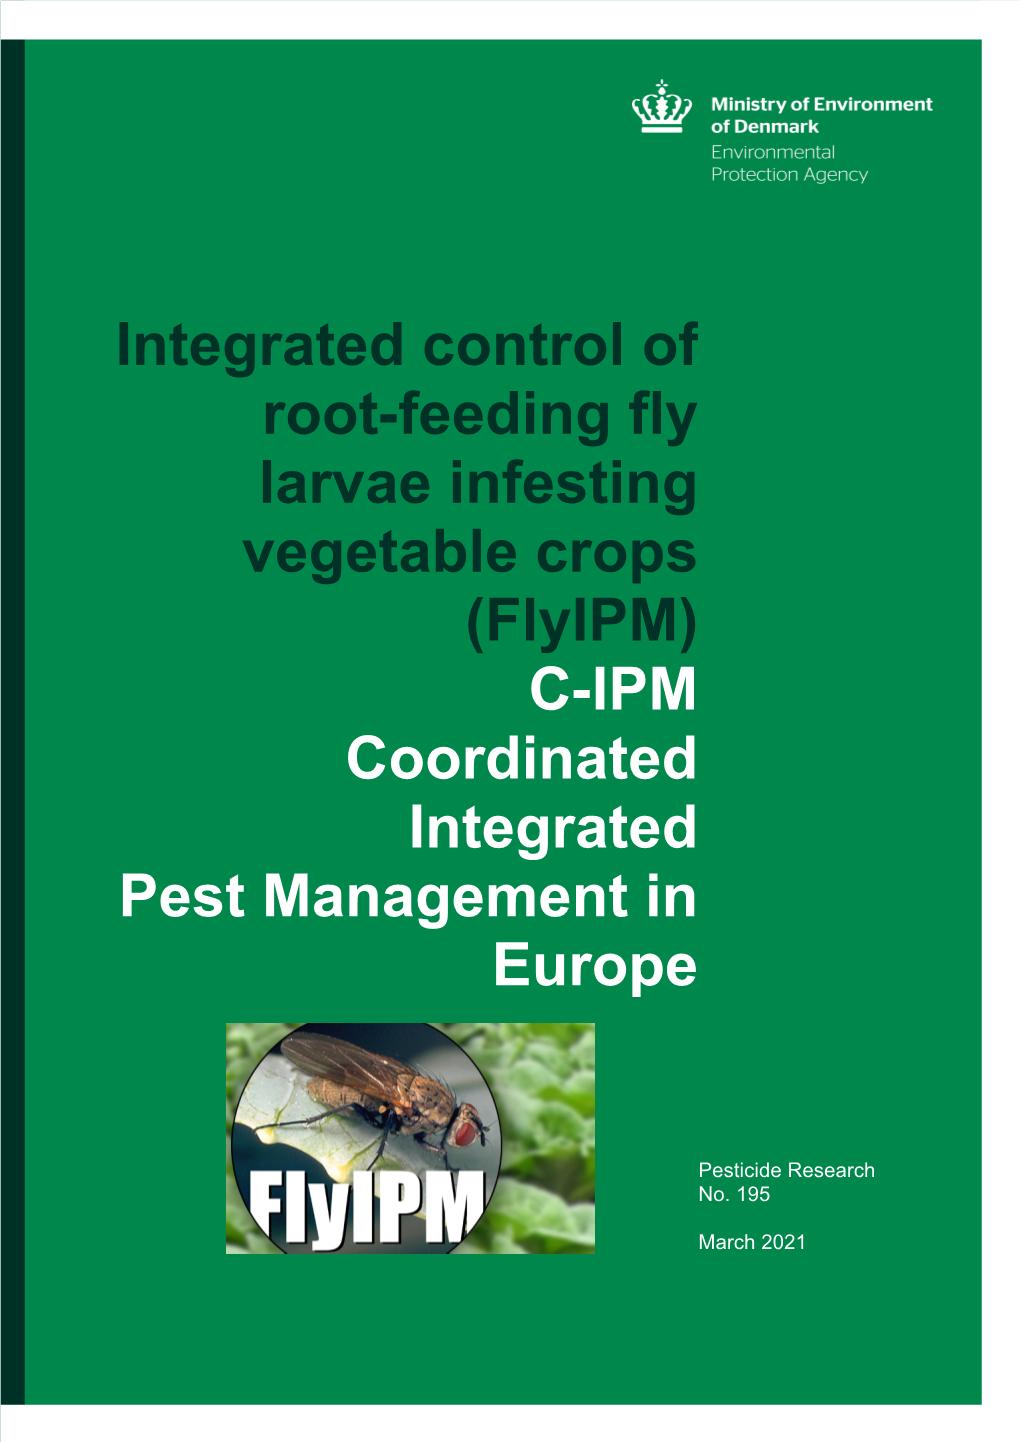 Integrated Control of Root-Feeding Fly Larvae Infesting Vegetable Crops (Flyipm) C-IPM Coordinated Integrated Pest Management in Europe